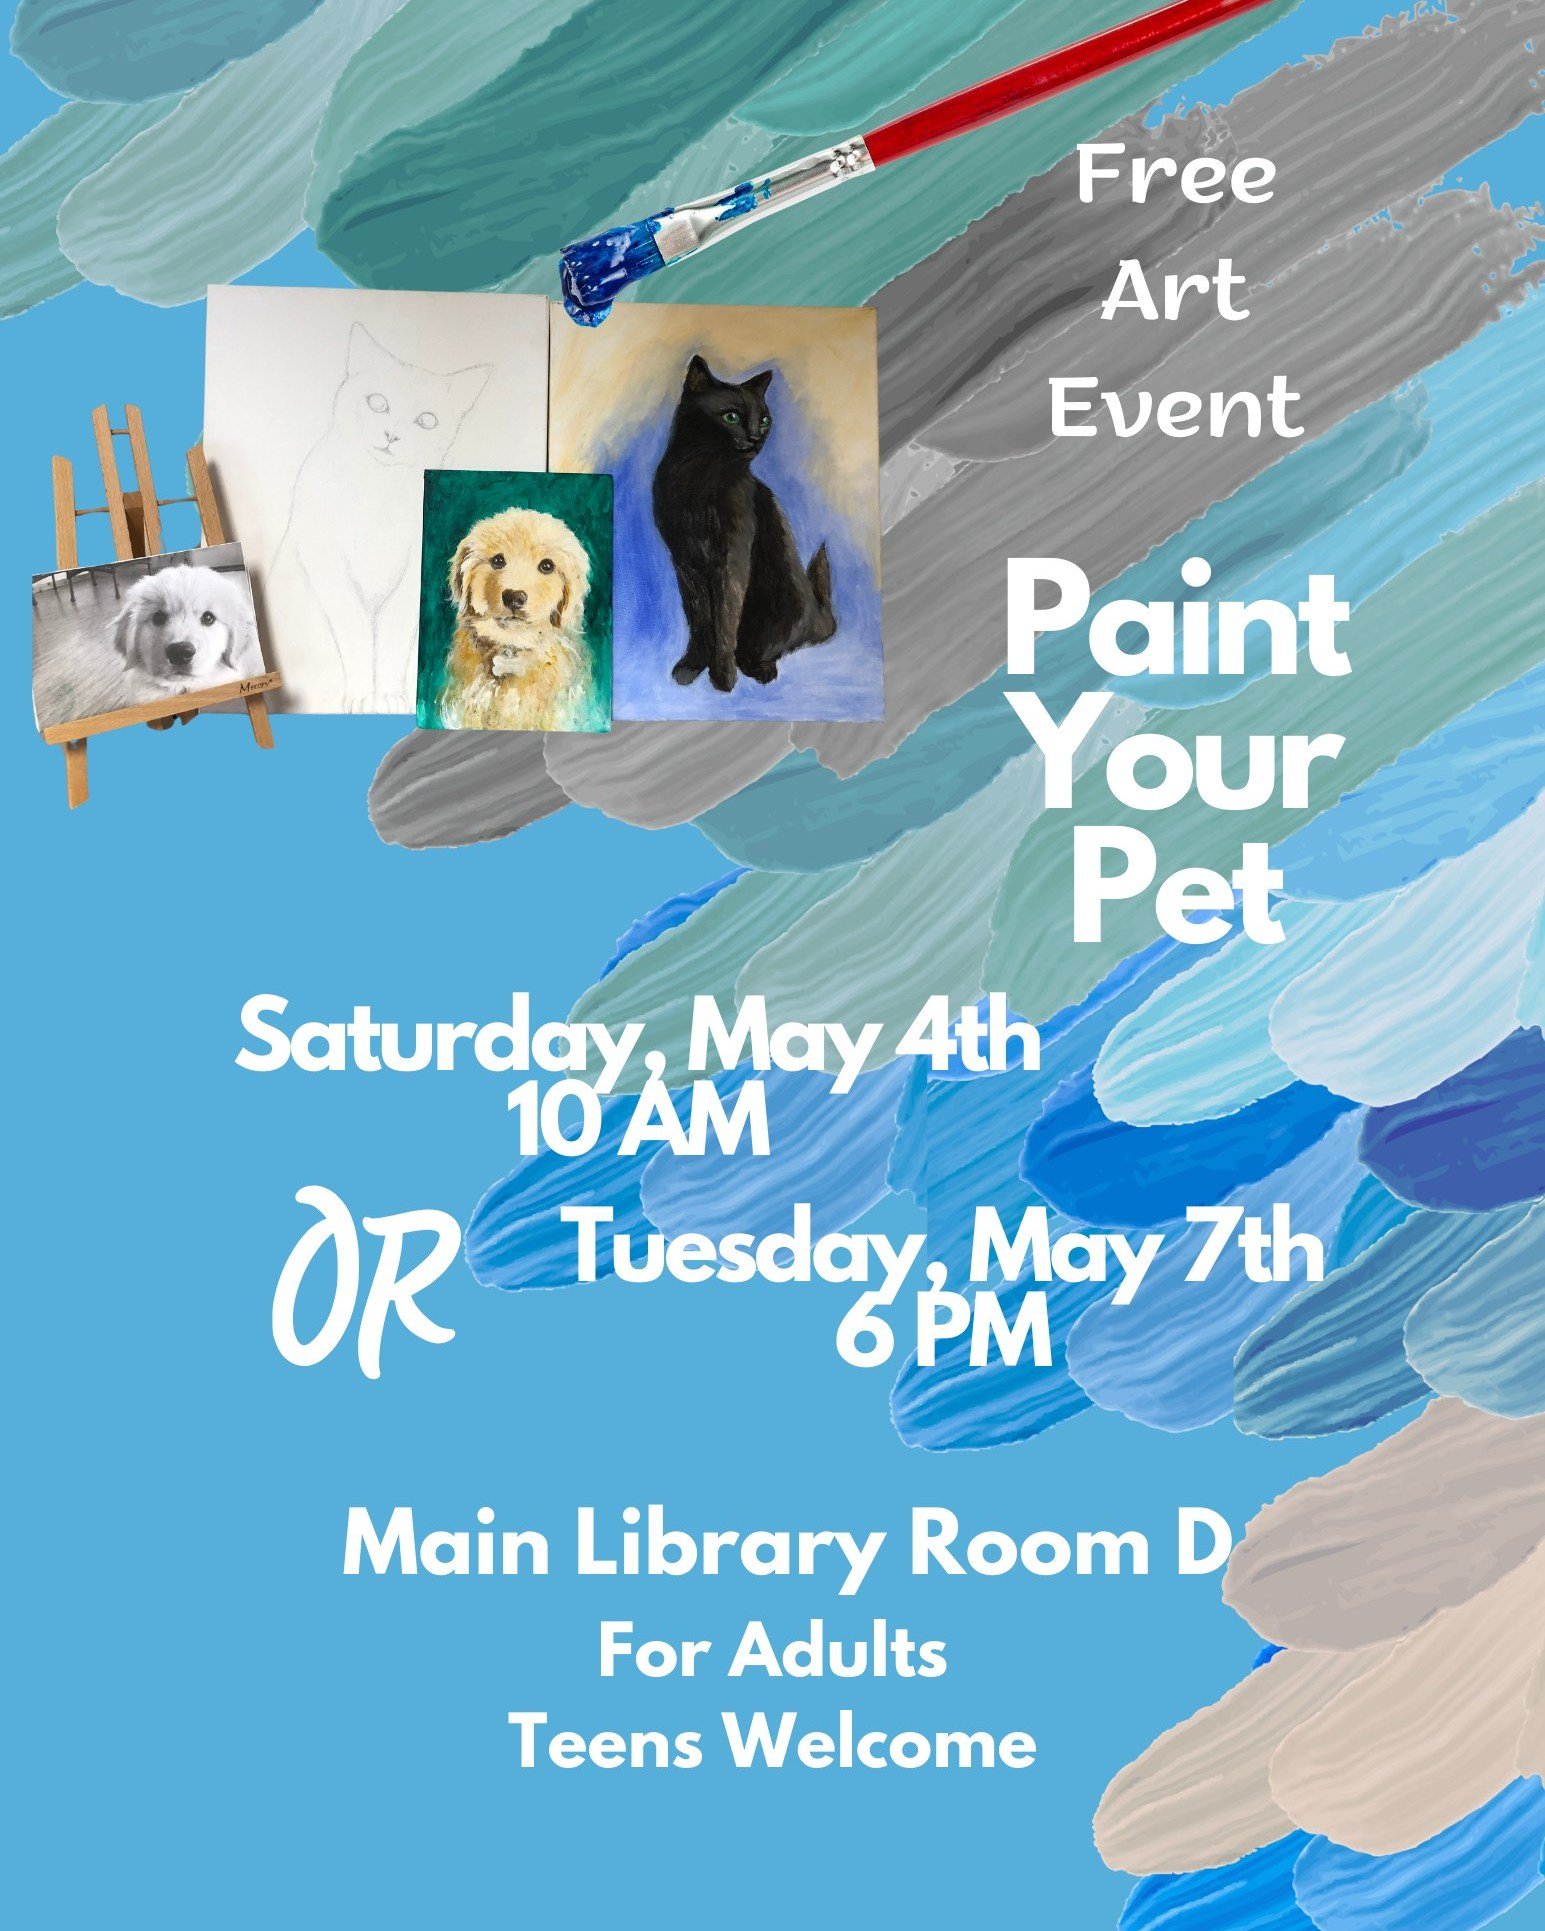 Join us on Saturday, May 4th at 10 am or on Tuesday, May 7th at 6pm. This is an adult program but interested teens are welcome! 🐱🐶🎨🖌
.
.
.
#Pet #Animal #Painting #Art #Creative #Library #fyp #Shelbyvilleindiana #Indiana